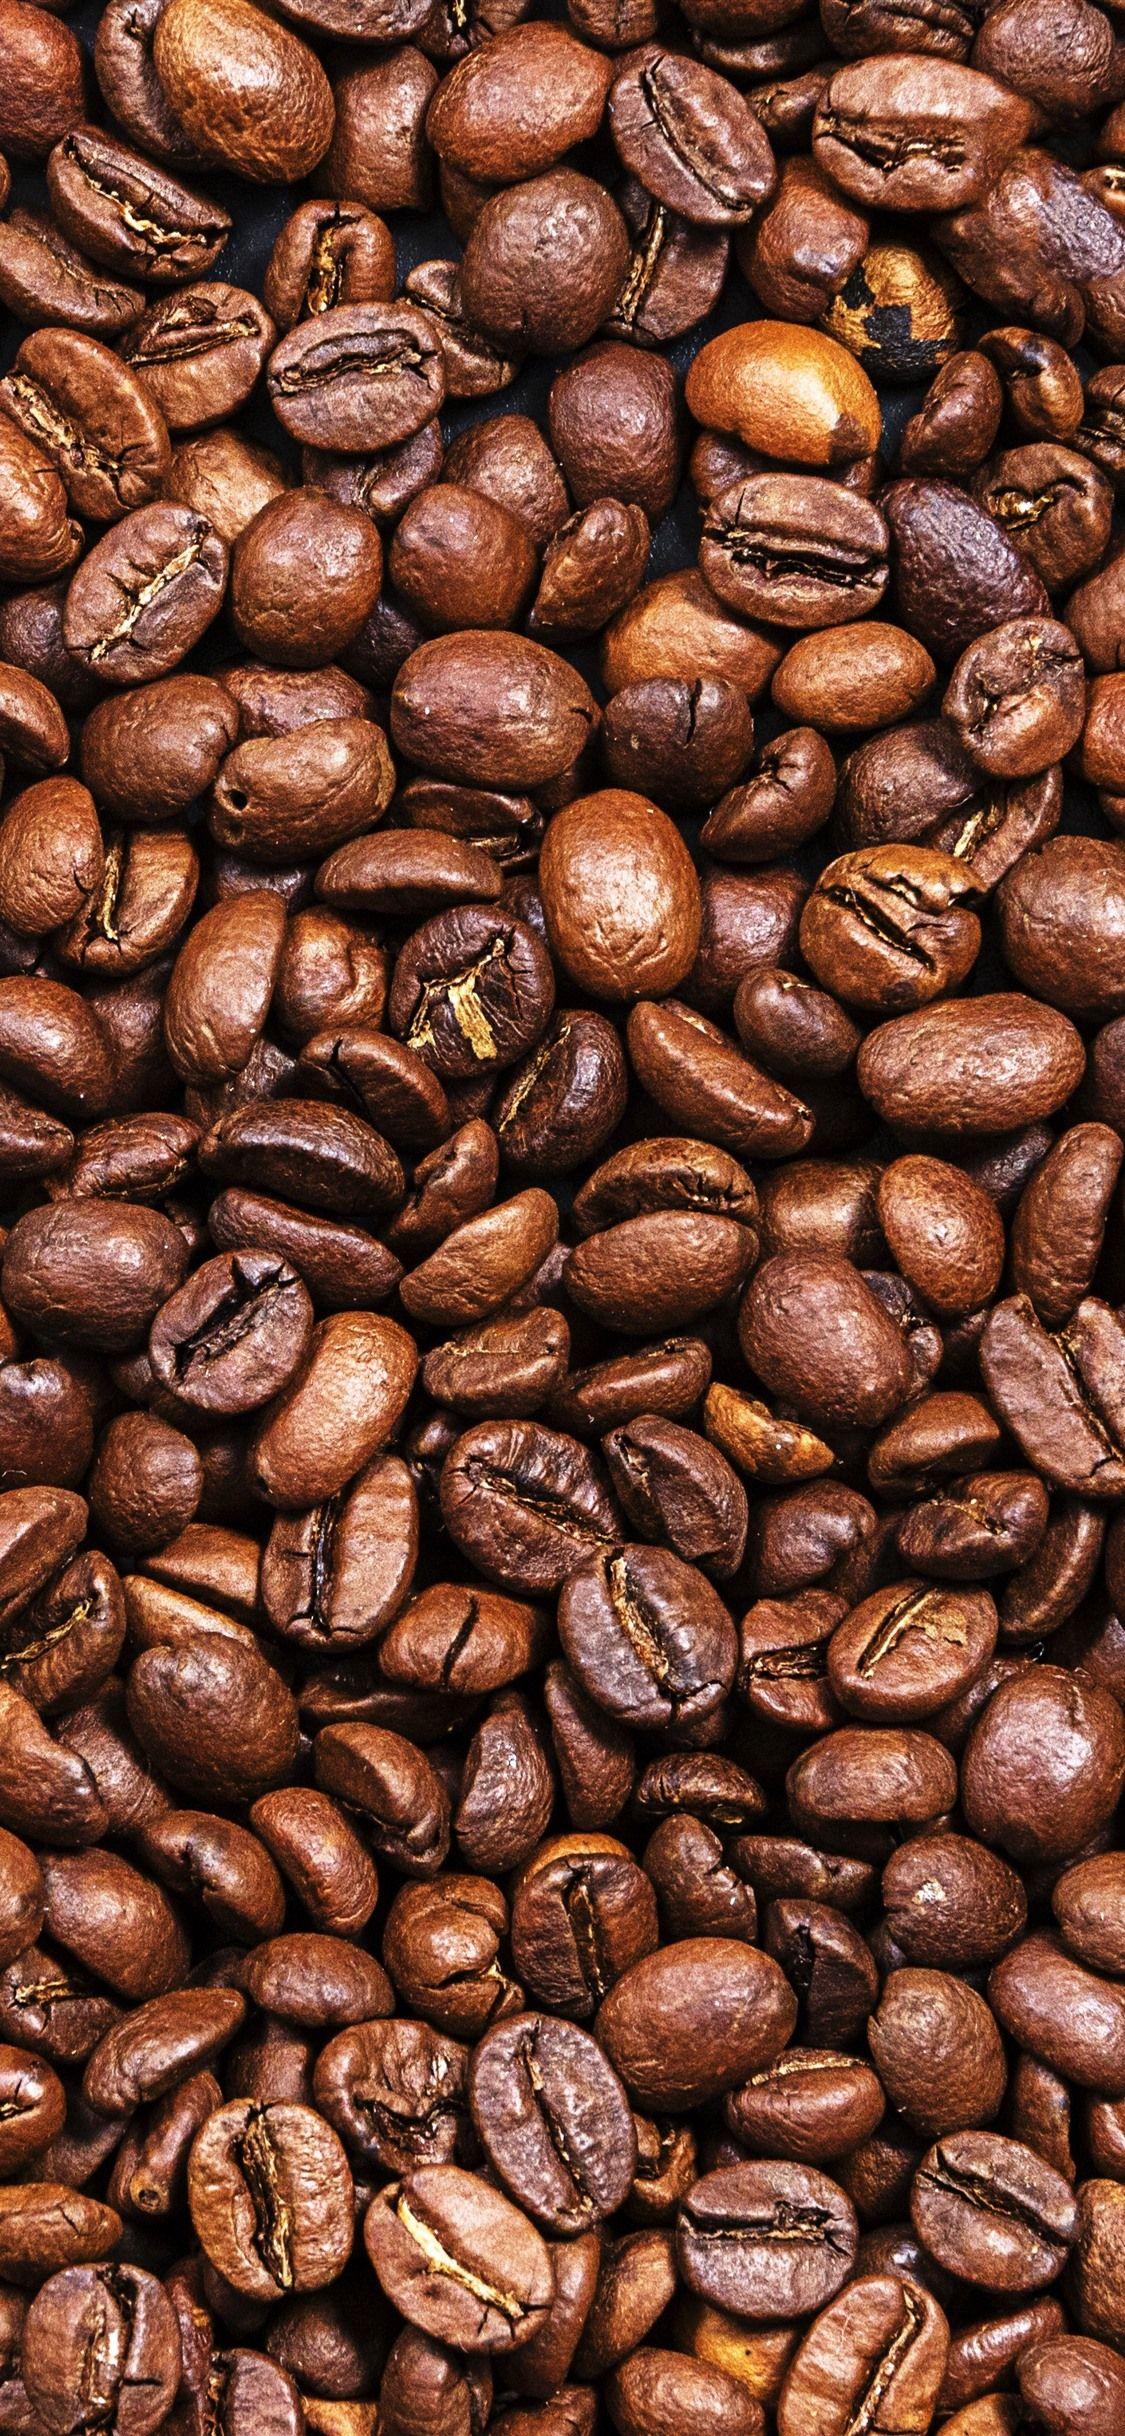 Free download Coffee iphone wallpaper Iphone wallpapers Pinterest  548x1024 for your Desktop Mobile  Tablet  Explore 50 Coffee iPhone  Wallpapers  Coffee Beans Background Wallpaper Coffee Theme Coffee Shop  Wallpaper